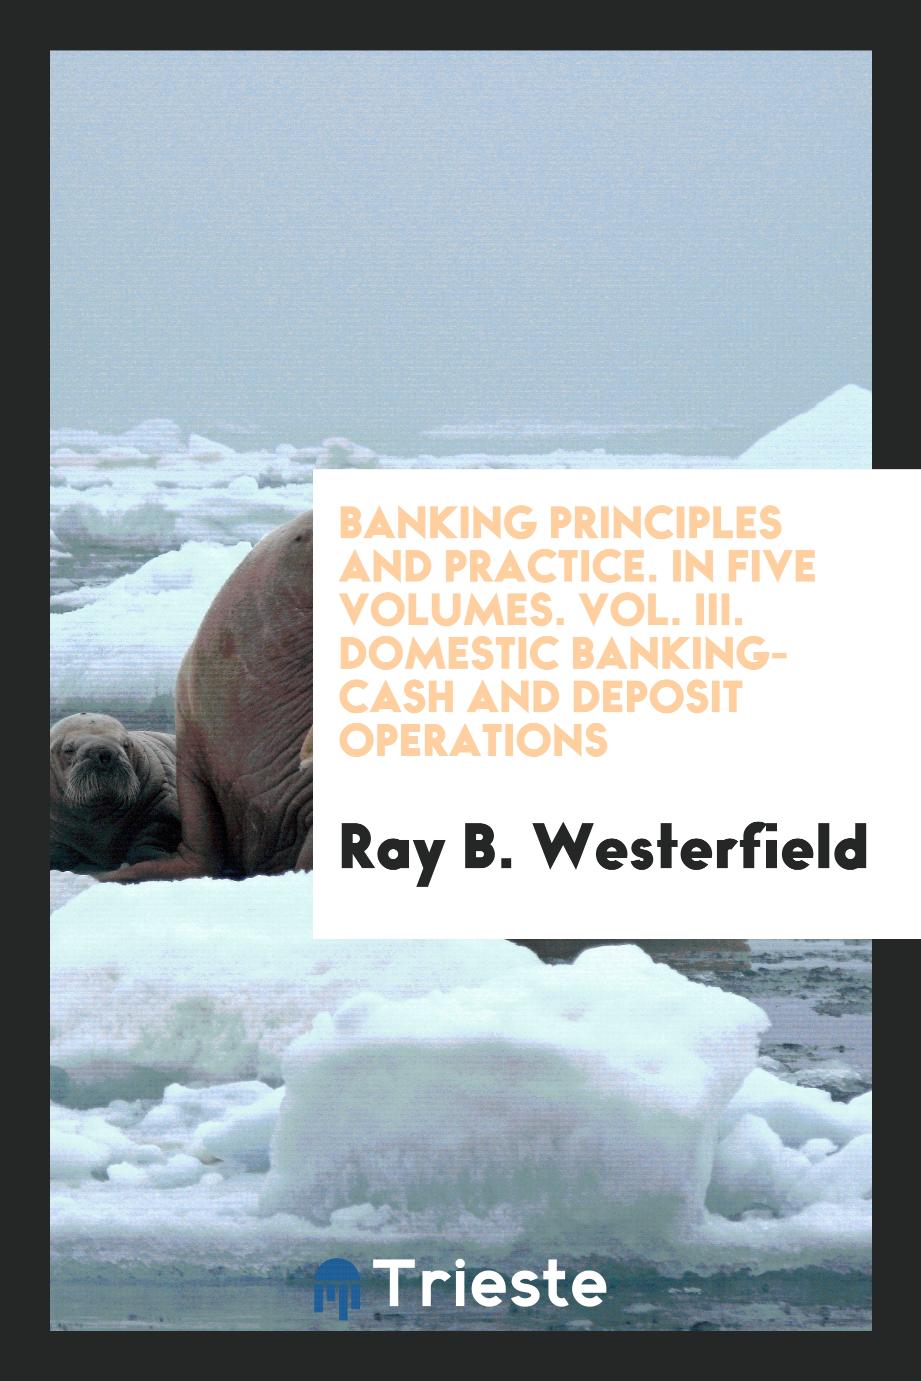 Banking Principles and Practice. In Five Volumes. Vol. III. Domestic Banking-Cash and Deposit Operations